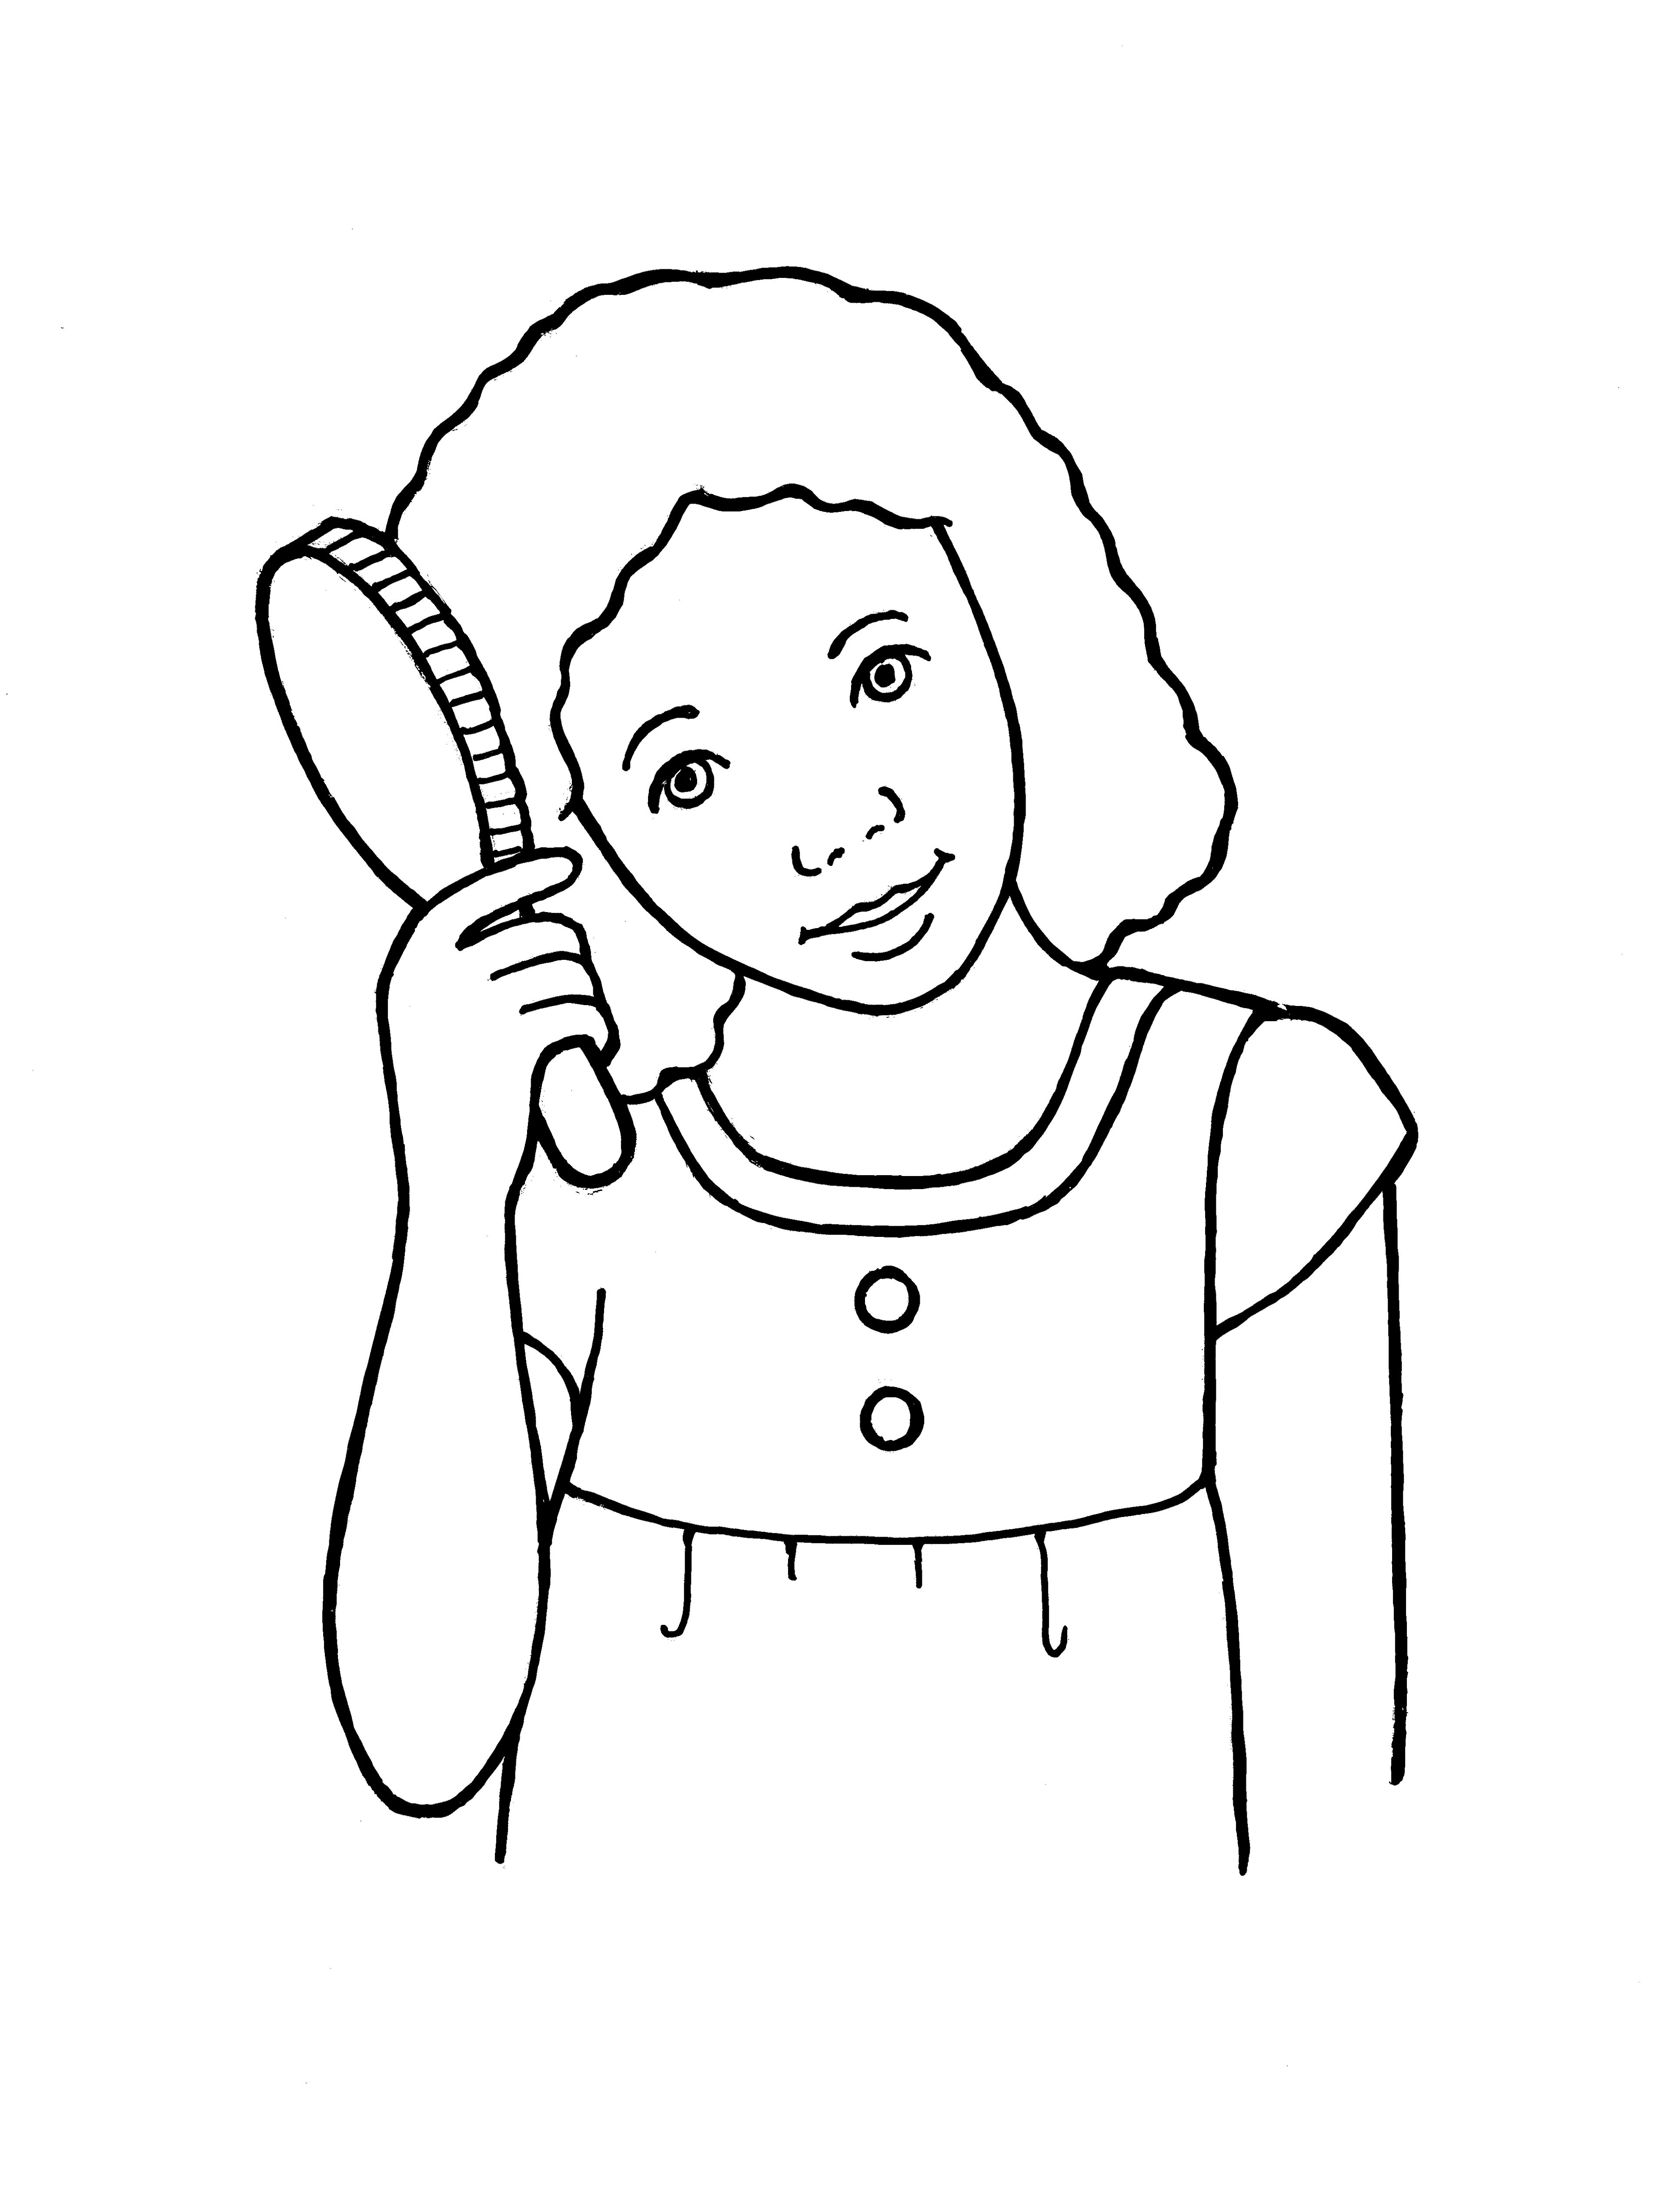 An illustration of a girl brushing her hair, from the nursery manual Behold Your Little Ones (2008), page 47.